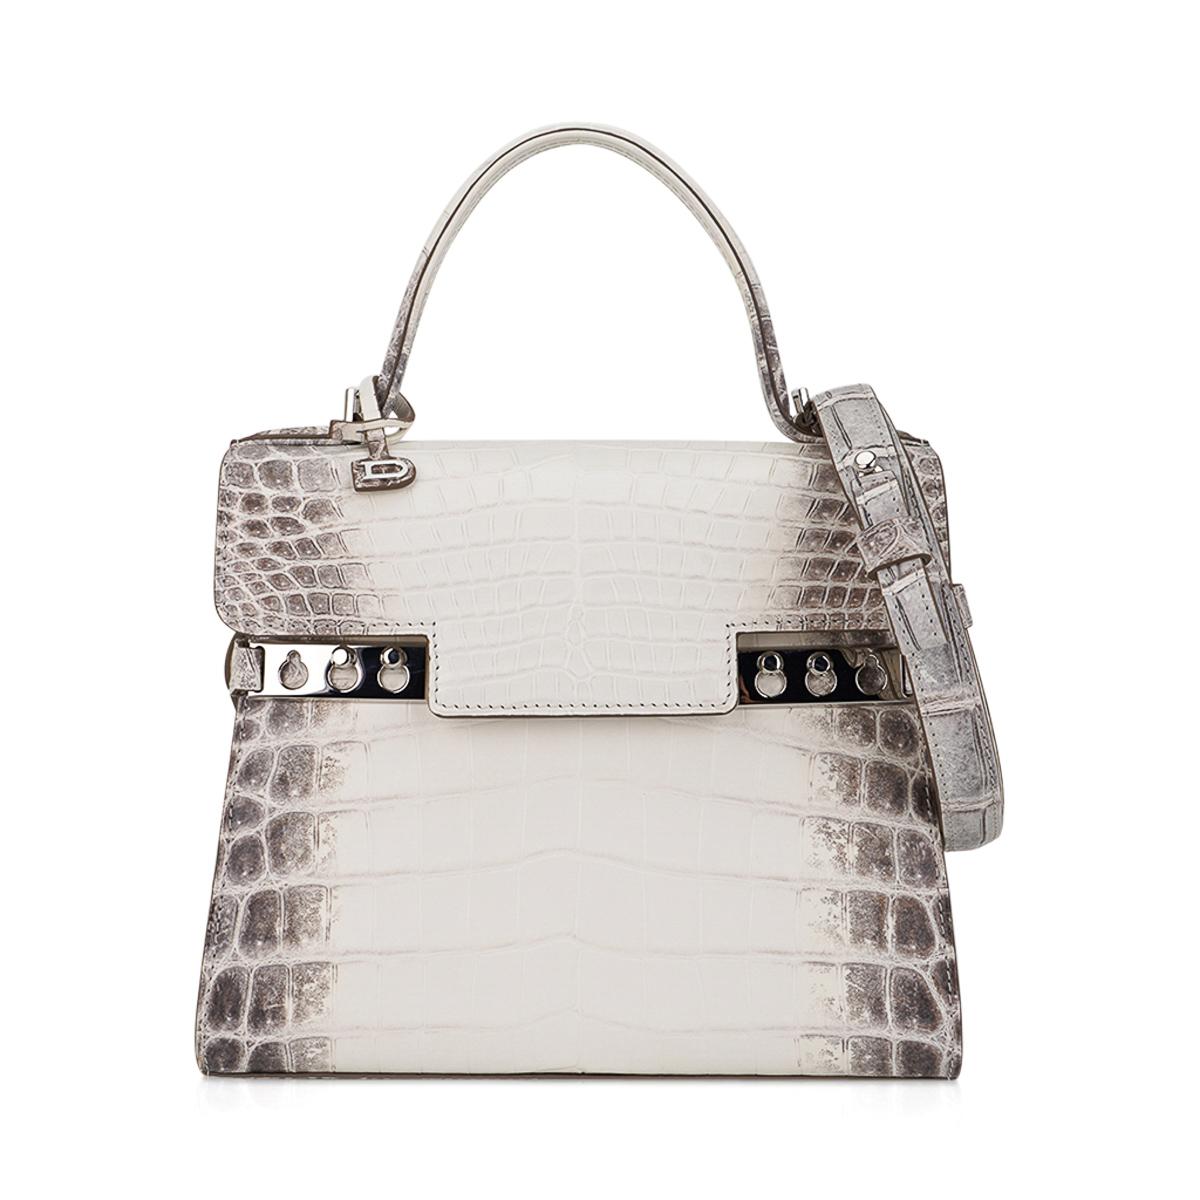 Delvaux Tempete PM Himalaya Crocodile Limited Edition Bag For Sale 9